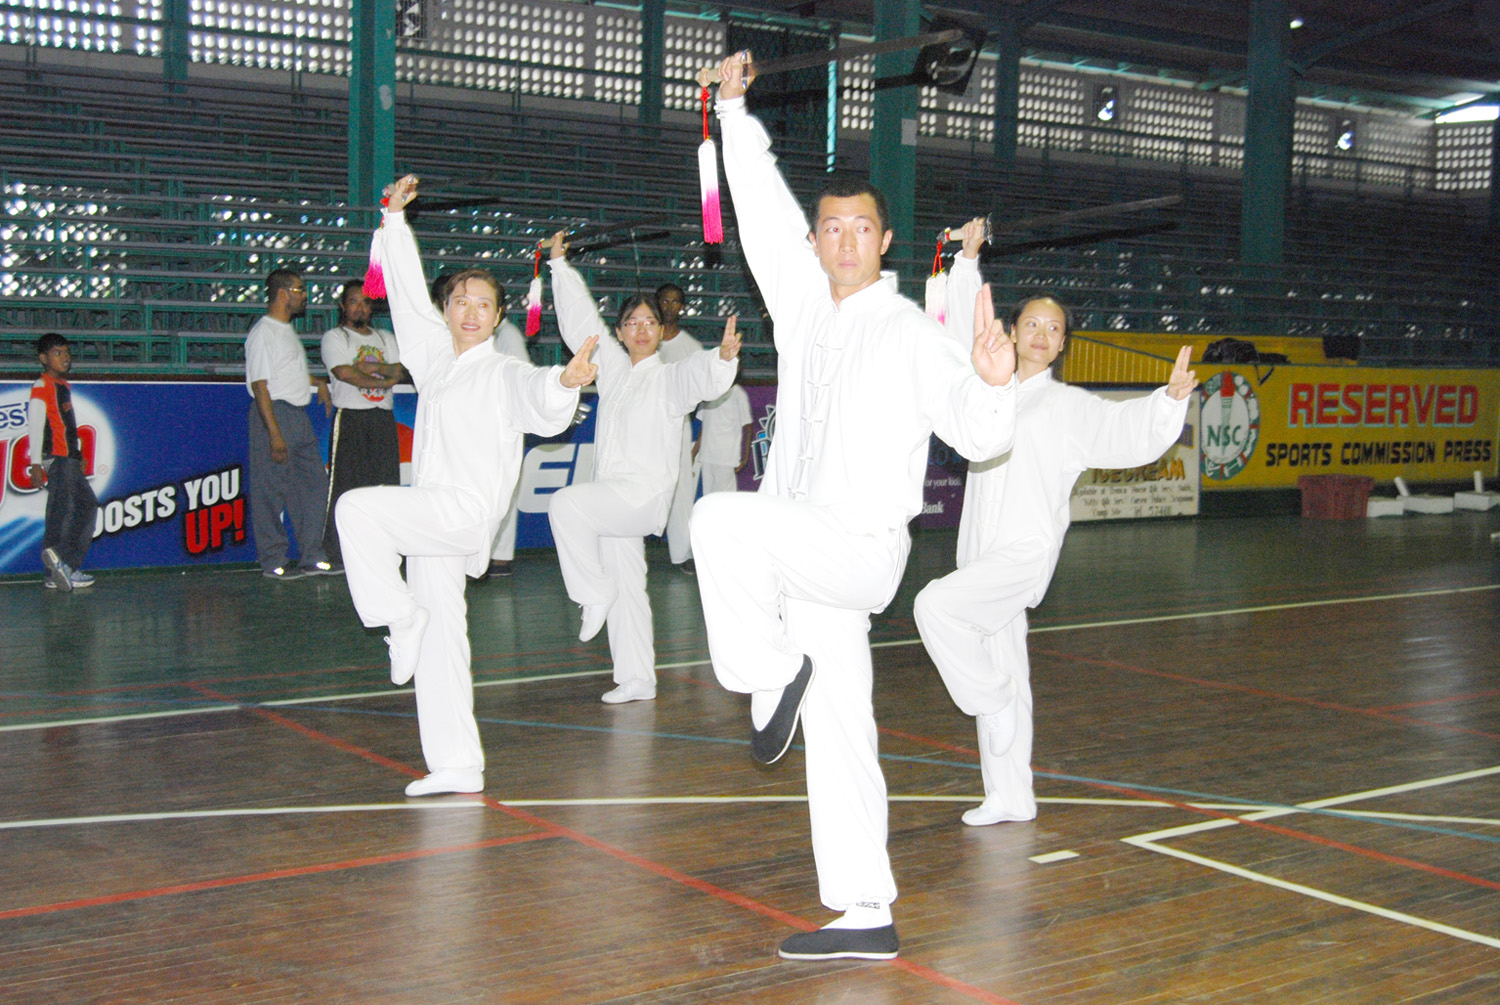 Local Tai Chi Instructor Cao Aibing, front right, demonstrates one of the forms in the art of the Tai Chi sword along with Wang Jin, wife of the Chinese Ambassador, front left, and two secretaries attached to the Ambassador Sun Liping (rear left) and Huang Shang Shang (rear right) at the Cliff Anderson Sports Hall yesterday. (Lawrence Fanfair photo)